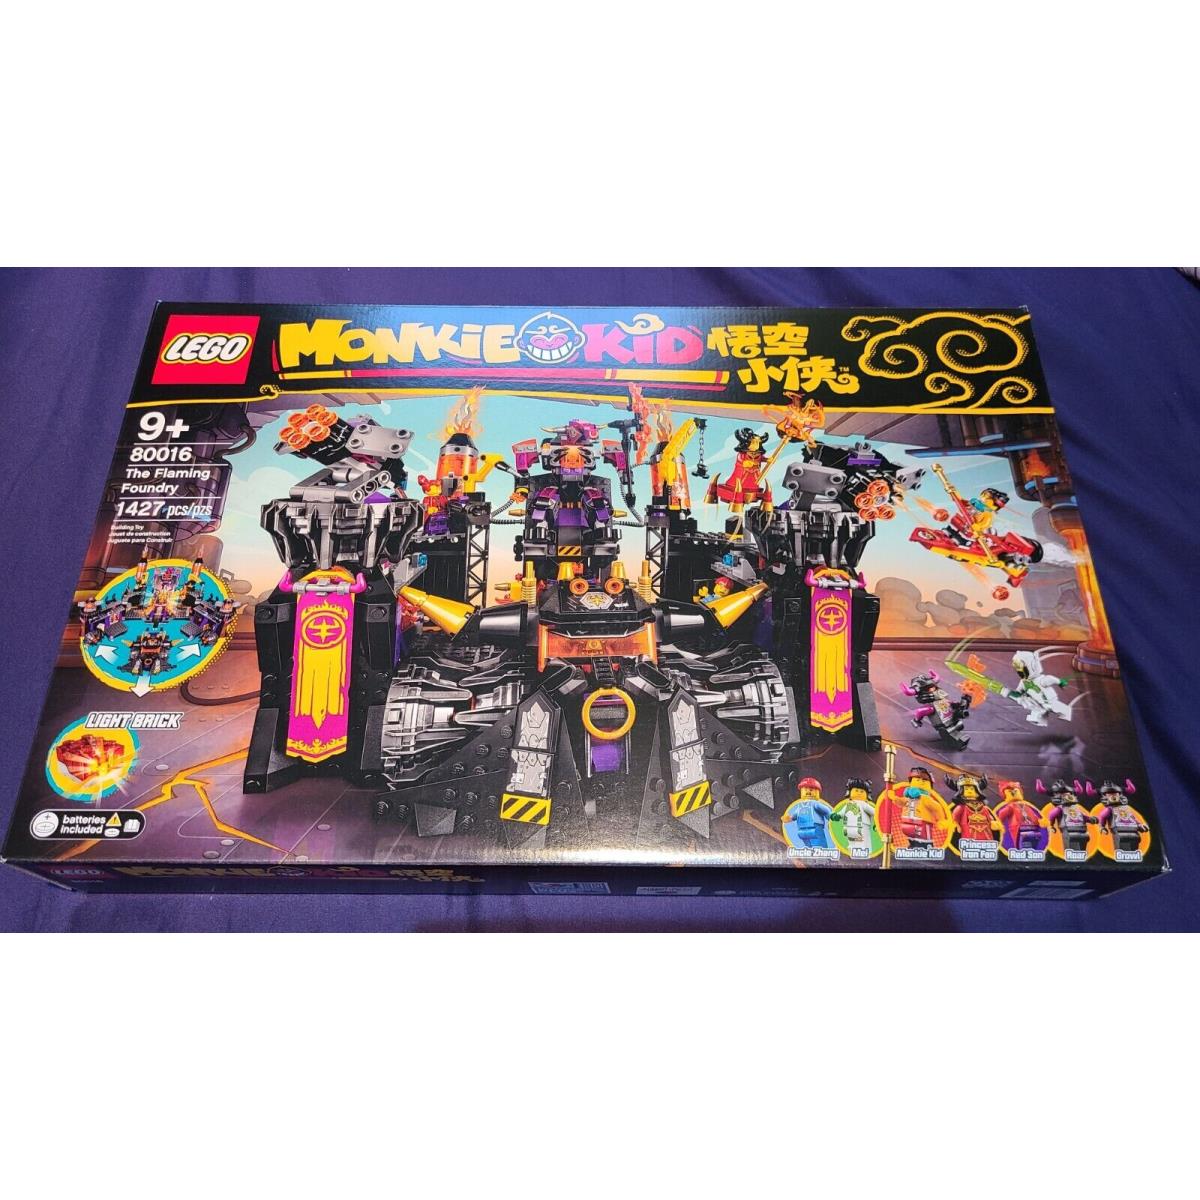 Lego Monkie Kid The Flaming Foundry 80016